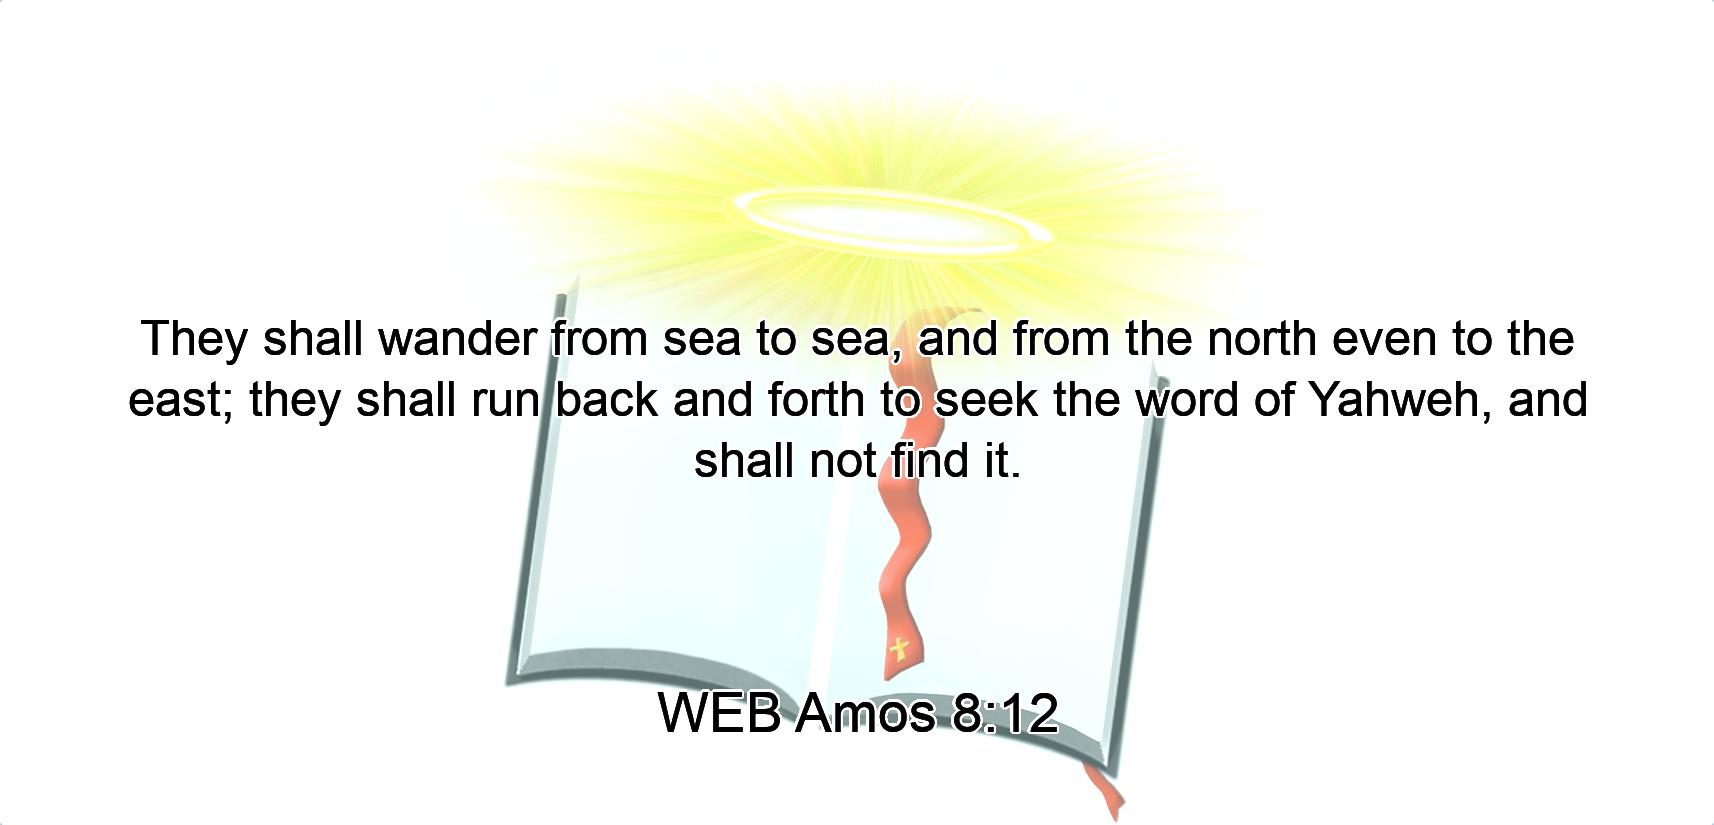 They shall wander from sea to sea, and from the north even to the east; they shall run back and forth to seek the word of Yahweh, and shall not find it.